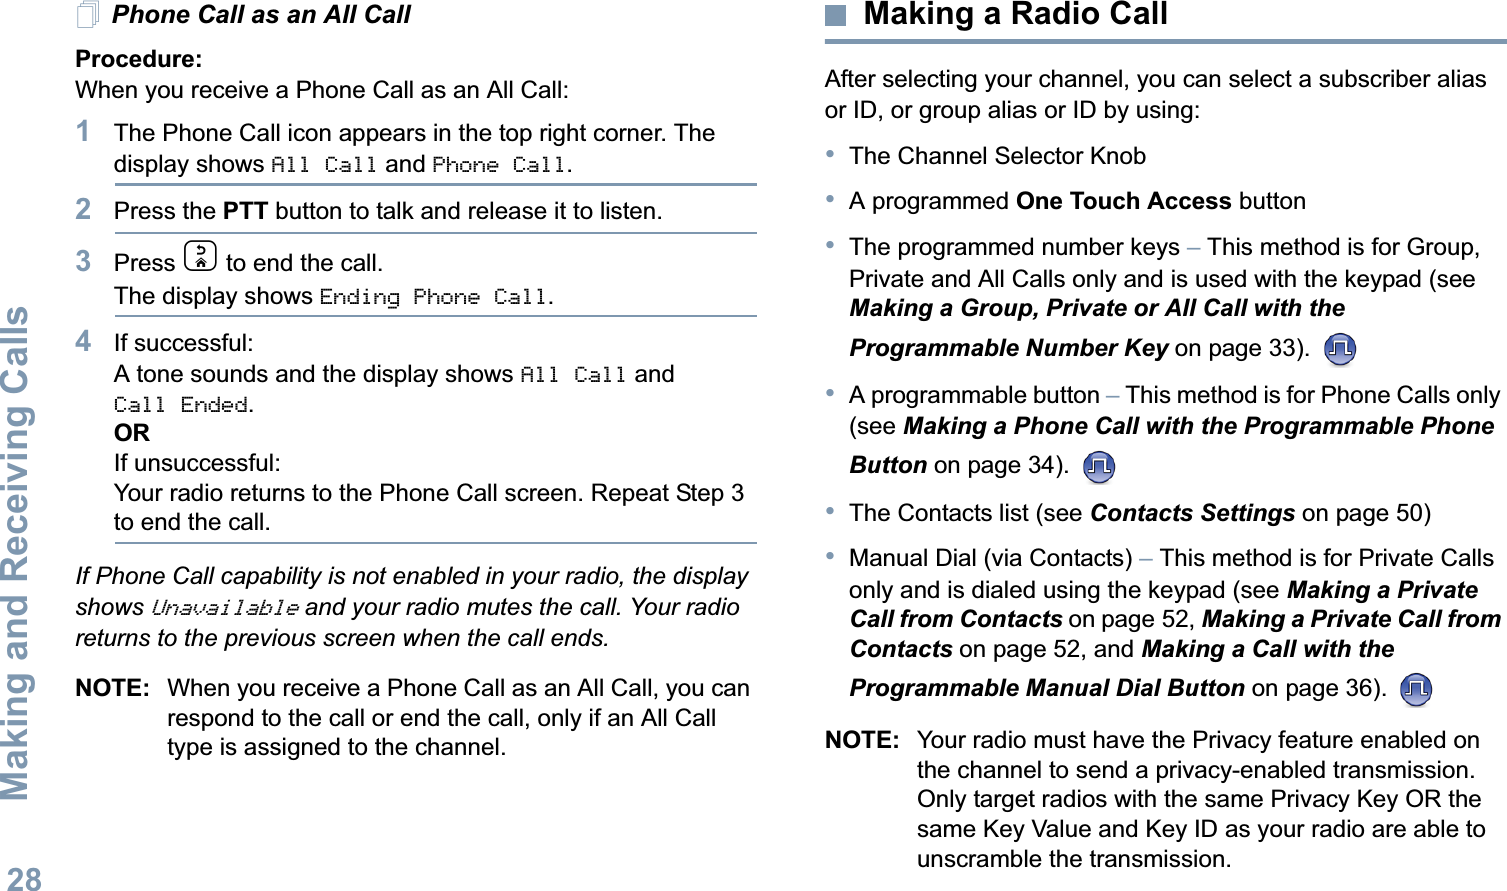 Making and Receiving CallsEnglish28Phone Call as an All Call Procedure:When you receive a Phone Call as an All Call:1The Phone Call icon appears in the top right corner. The display shows All Call and Phone Call.2Press the PTT button to talk and release it to listen.3Press d to end the call.The display shows Ending Phone Call.4If successful:A tone sounds and the display shows All Call and Call Ended. ORIf unsuccessful:Your radio returns to the Phone Call screen. Repeat Step 3 to end the call.If Phone Call capability is not enabled in your radio, the display shows Unavailable and your radio mutes the call. Your radio returns to the previous screen when the call ends.NOTE: When you receive a Phone Call as an All Call, you can respond to the call or end the call, only if an All Call type is assigned to the channel.Making a Radio CallAfter selecting your channel, you can select a subscriber alias or ID, or group alias or ID by using:•The Channel Selector Knob•A programmed One Touch Access button •The programmed number keys – This method is for Group, Private and All Calls only and is used with the keypad (see Making a Group, Private or All Call with the Programmable Number Key on page 33). •A programmable button – This method is for Phone Calls only (see Making a Phone Call with the Programmable Phone Button on page 34). •The Contacts list (see Contacts Settings on page 50)•Manual Dial (via Contacts) – This method is for Private Calls only and is dialed using the keypad (see Making a Private Call from Contacts on page 52, Making a Private Call from Contacts on page 52, and Making a Call with the Programmable Manual Dial Button on page 36). NOTE: Your radio must have the Privacy feature enabled on the channel to send a privacy-enabled transmission. Only target radios with the same Privacy Key OR the same Key Value and Key ID as your radio are able to unscramble the transmission. 